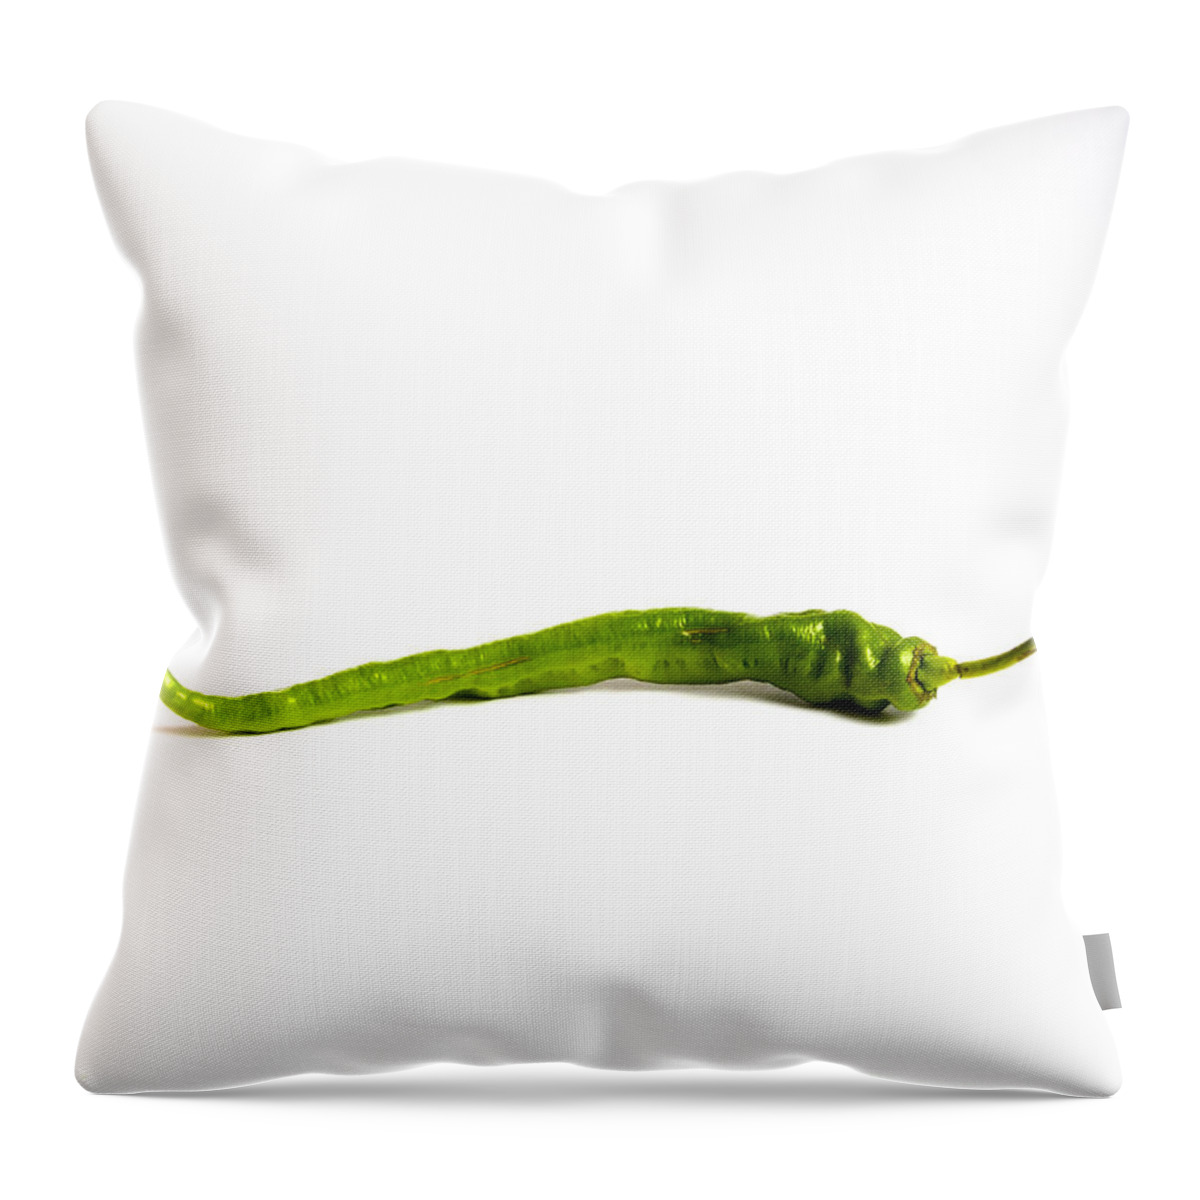 Chili Throw Pillow featuring the photograph Green Chili Pepper by Photo Researchers, Inc.